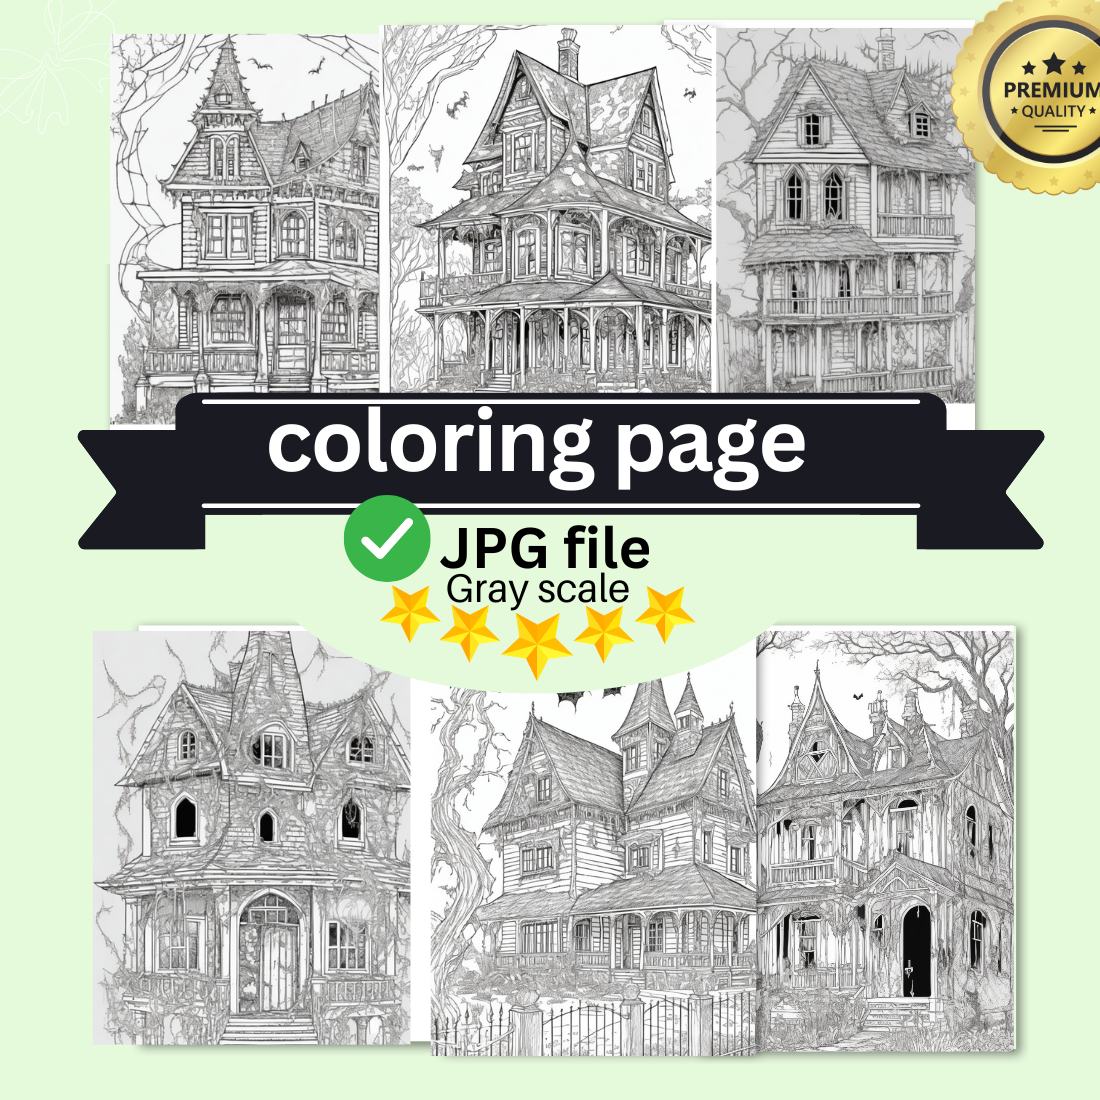 A haunted house with ghosts and cobwebs coloring page for adult cover image.